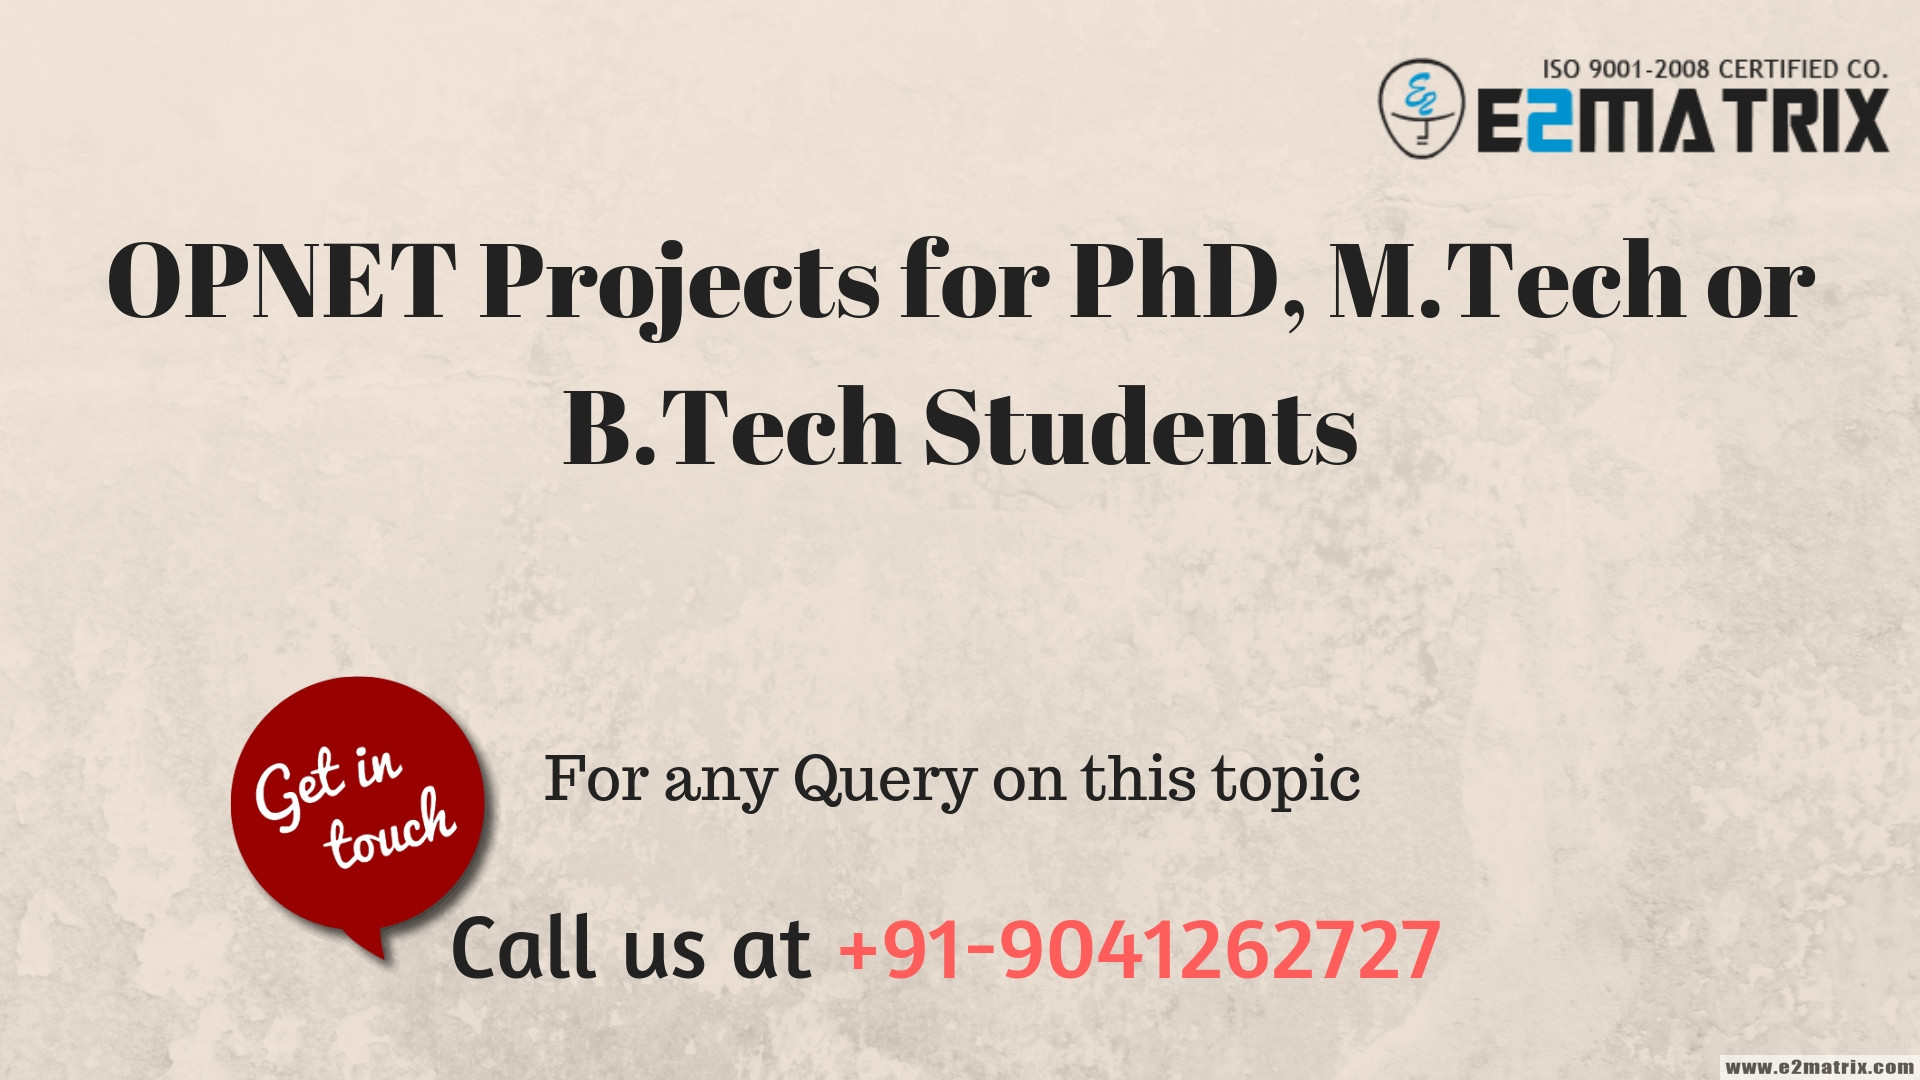 OPNET Projects for PhD, M.Tech or B.Tech students